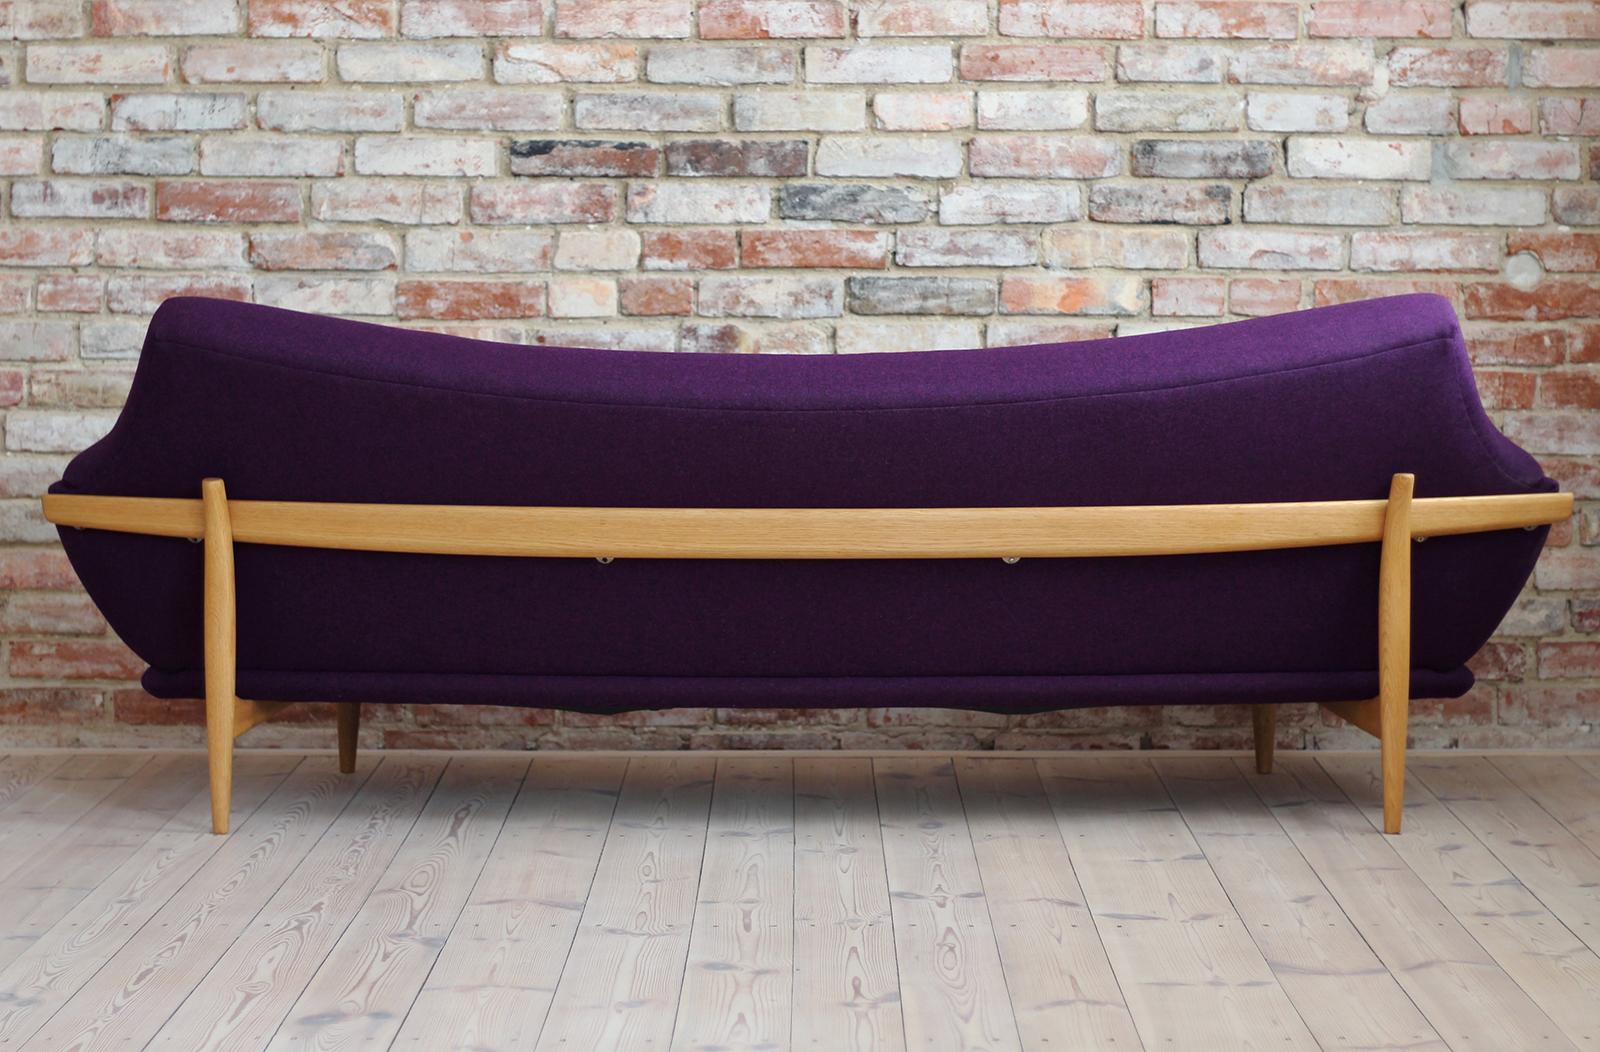 Wool Johannes Andersen Sofa for AB Trensums Reupholstered in Kvadrat Fabric, 1950s